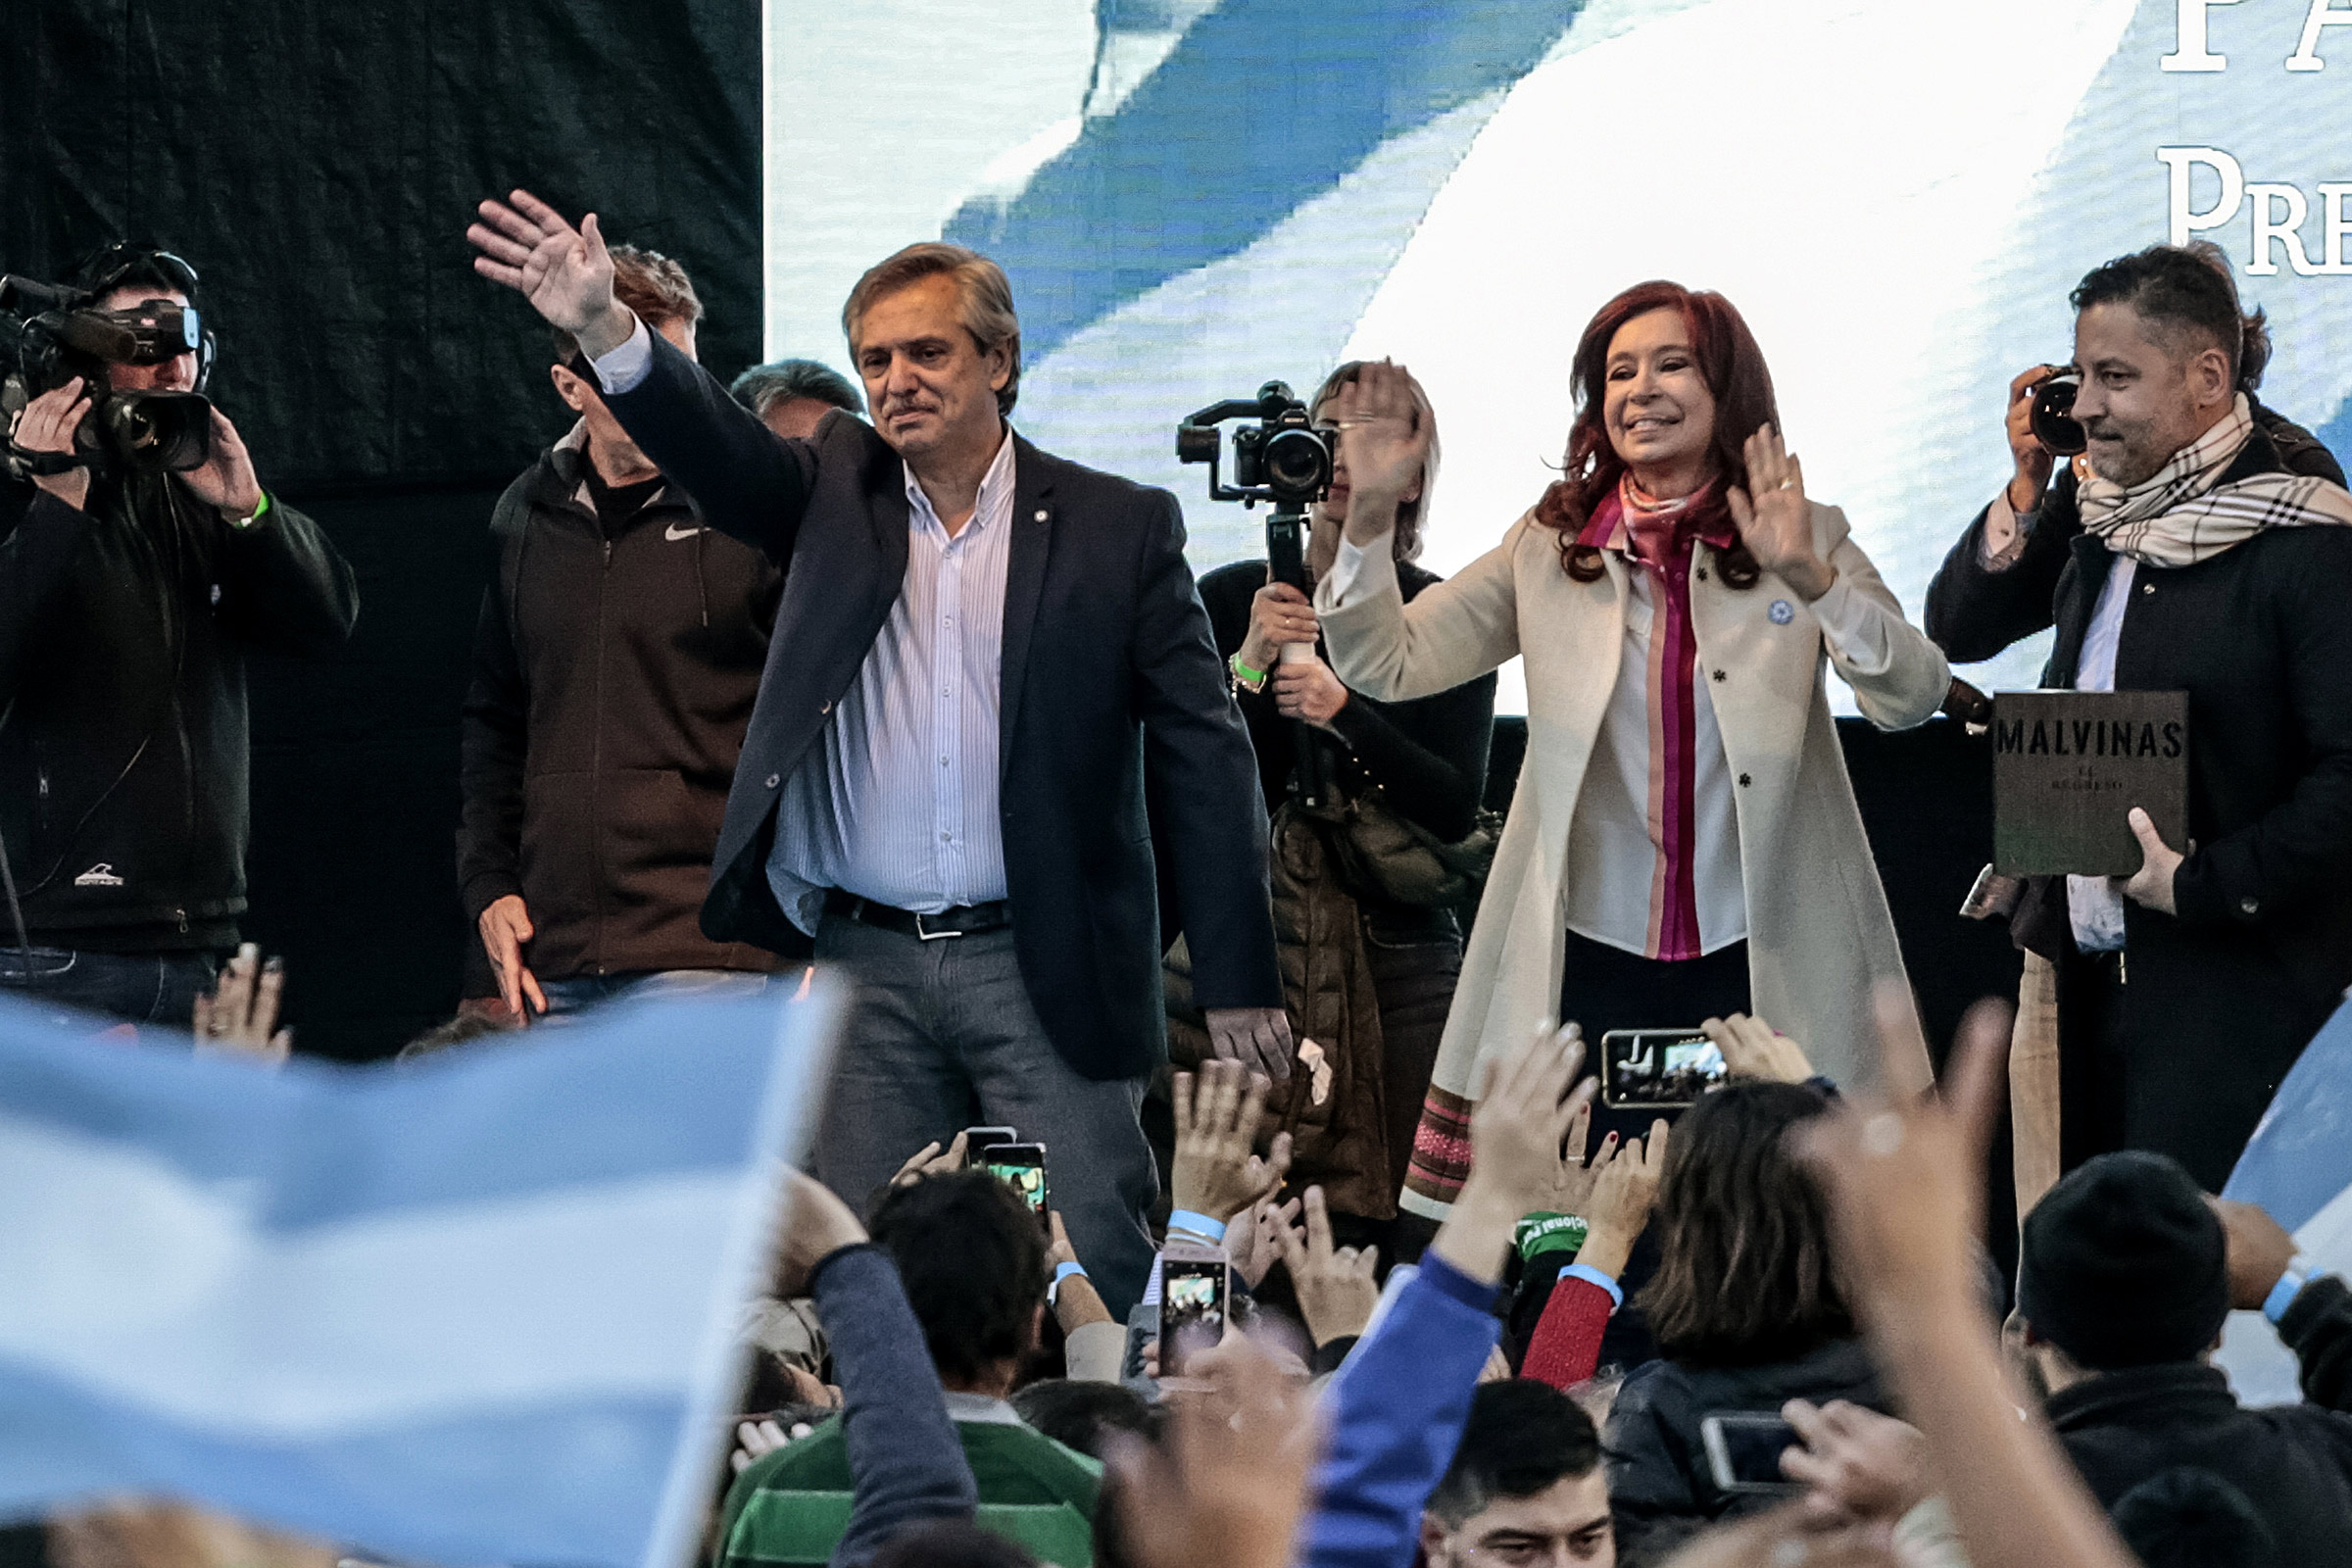 Presidential candidate Alberto Fernandez and former president of Argentina Cristina Fernandez de Kirchner wave to attendees during their first campaign event in Merlo, Argentina, on May 25.